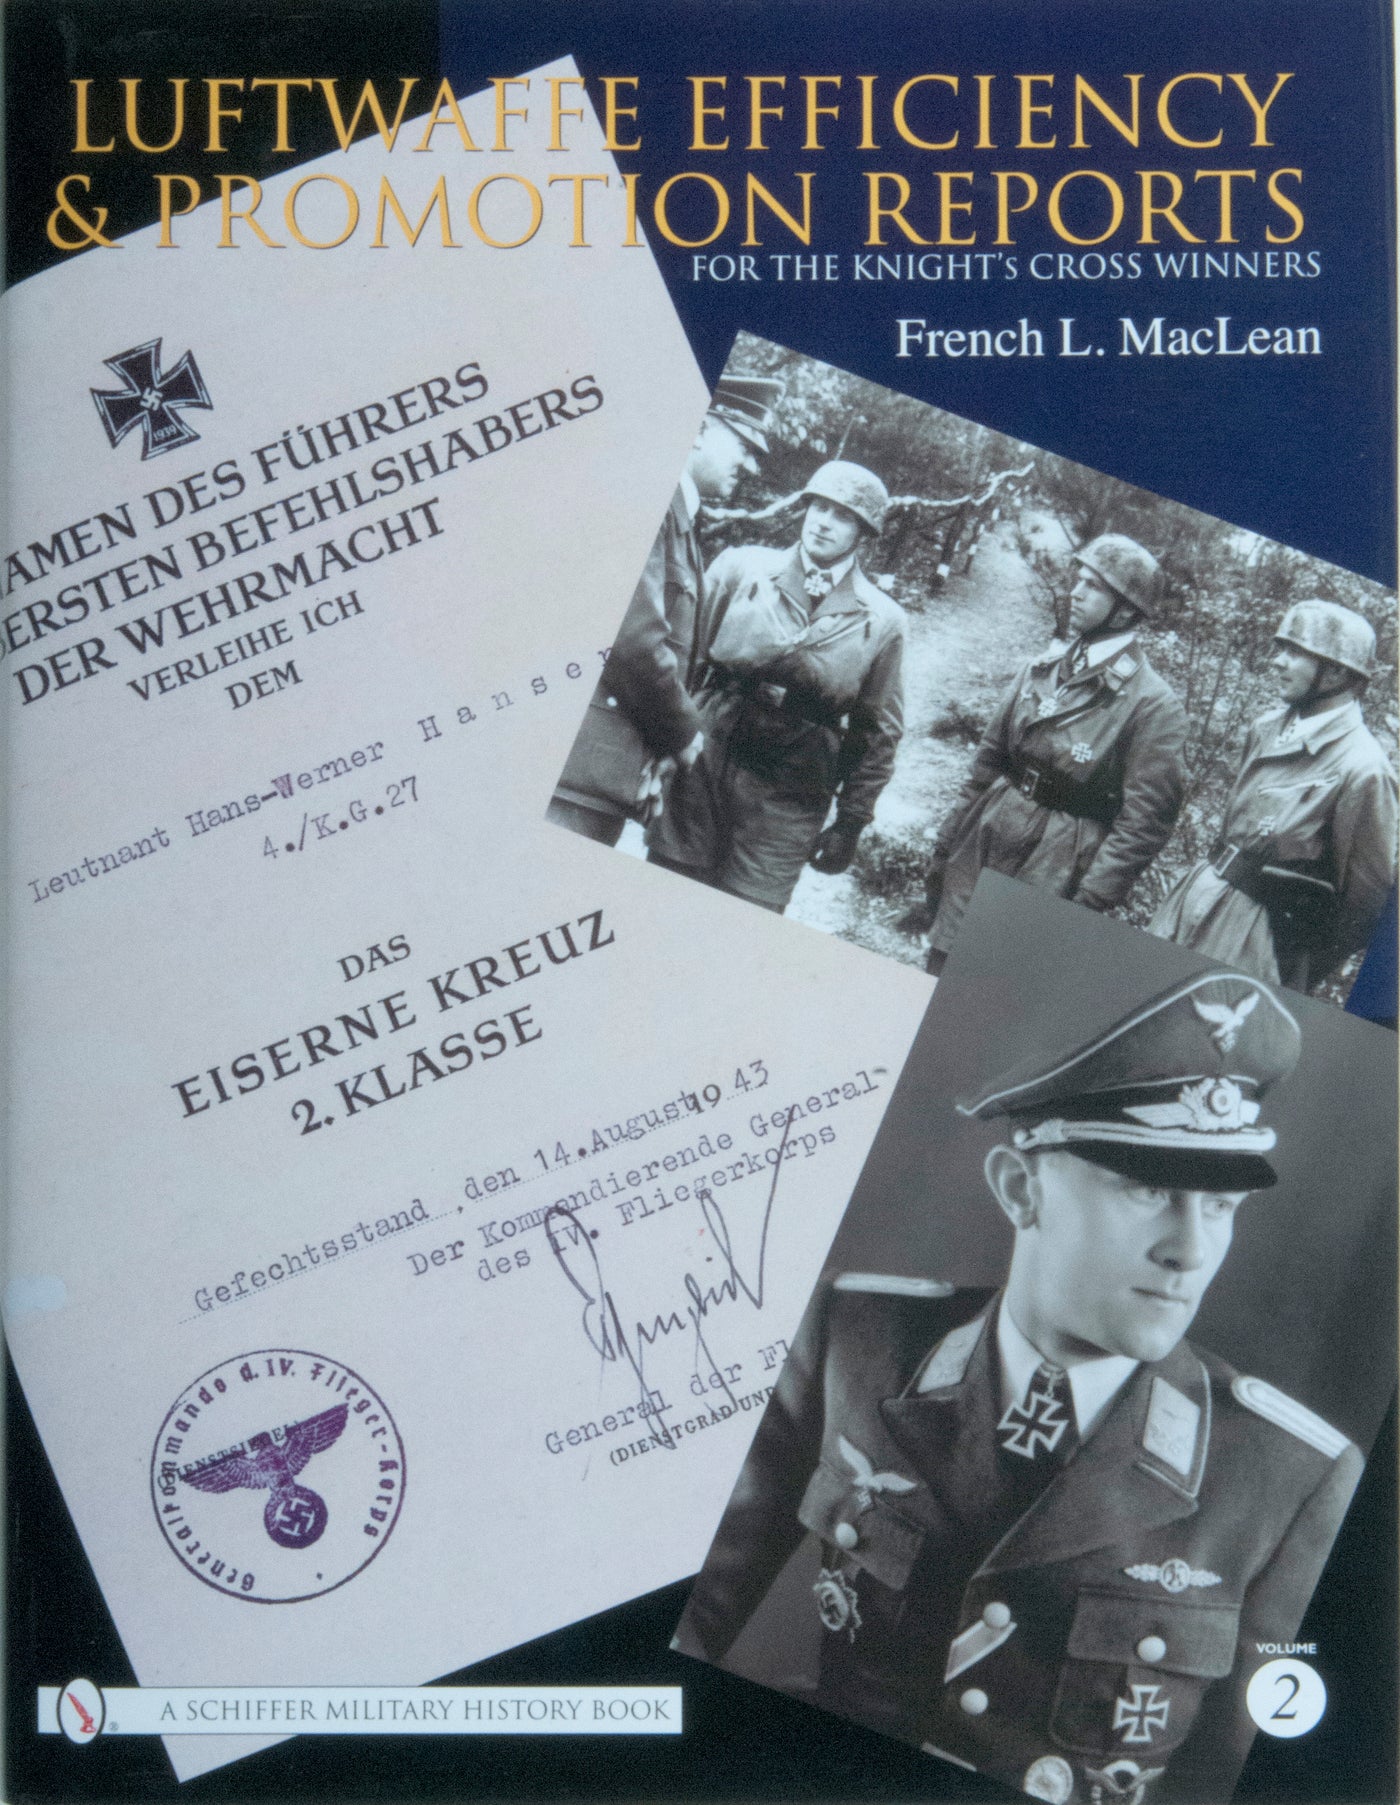 Luftwaffe Efficiency and Promotion Reports for the Knight's Cross Winners